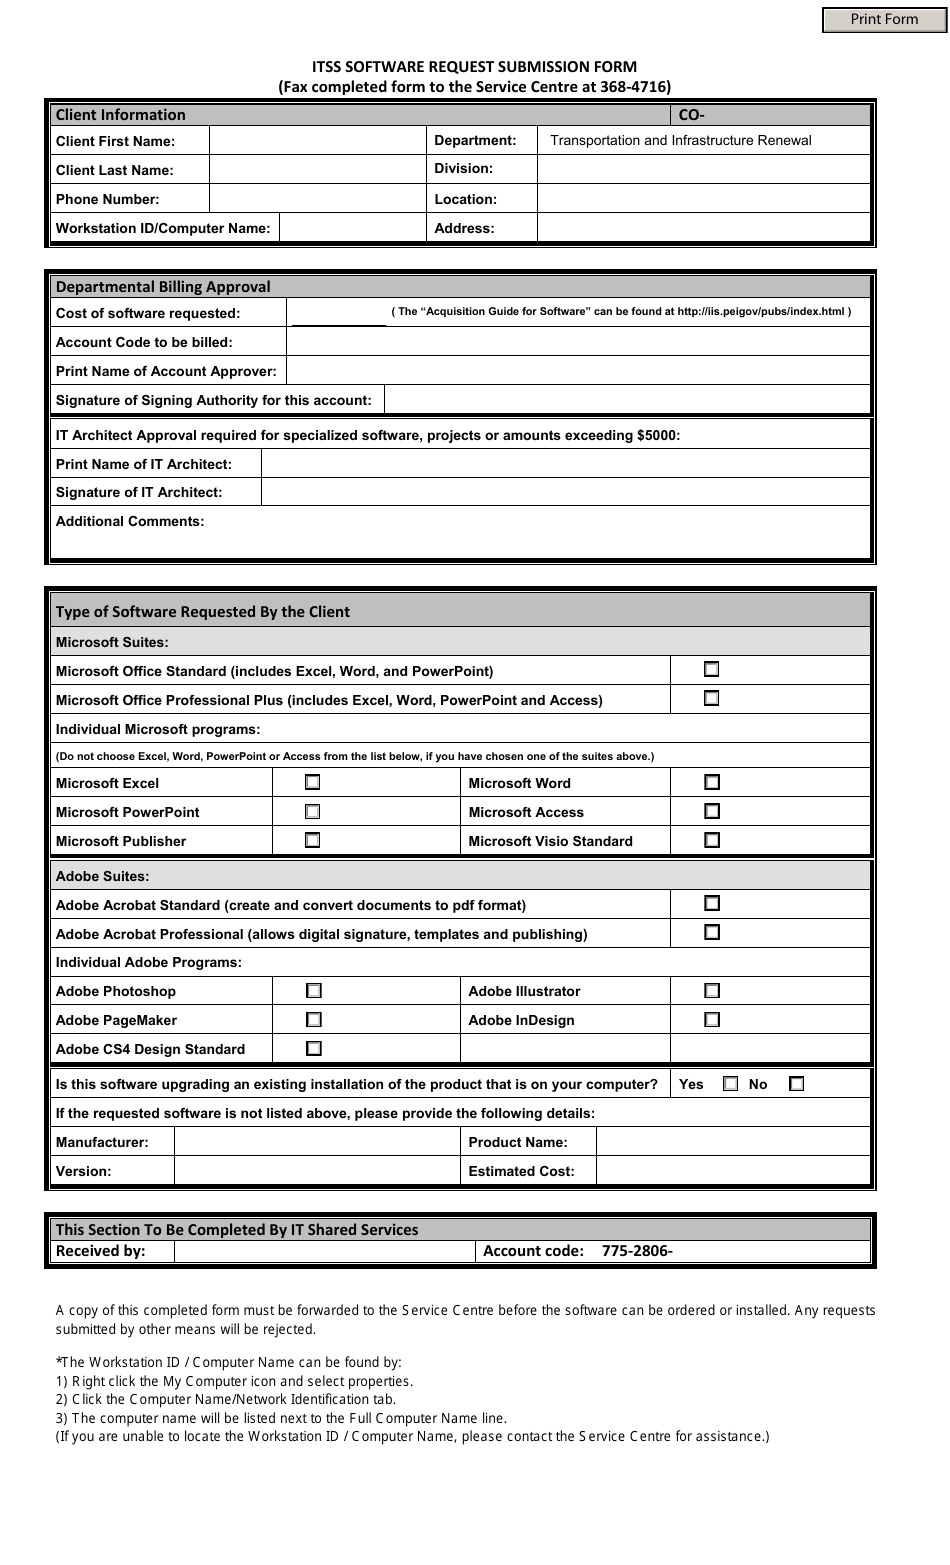 Itss Software Request Submission Form - Prince Edward Island, Canada, Page 1